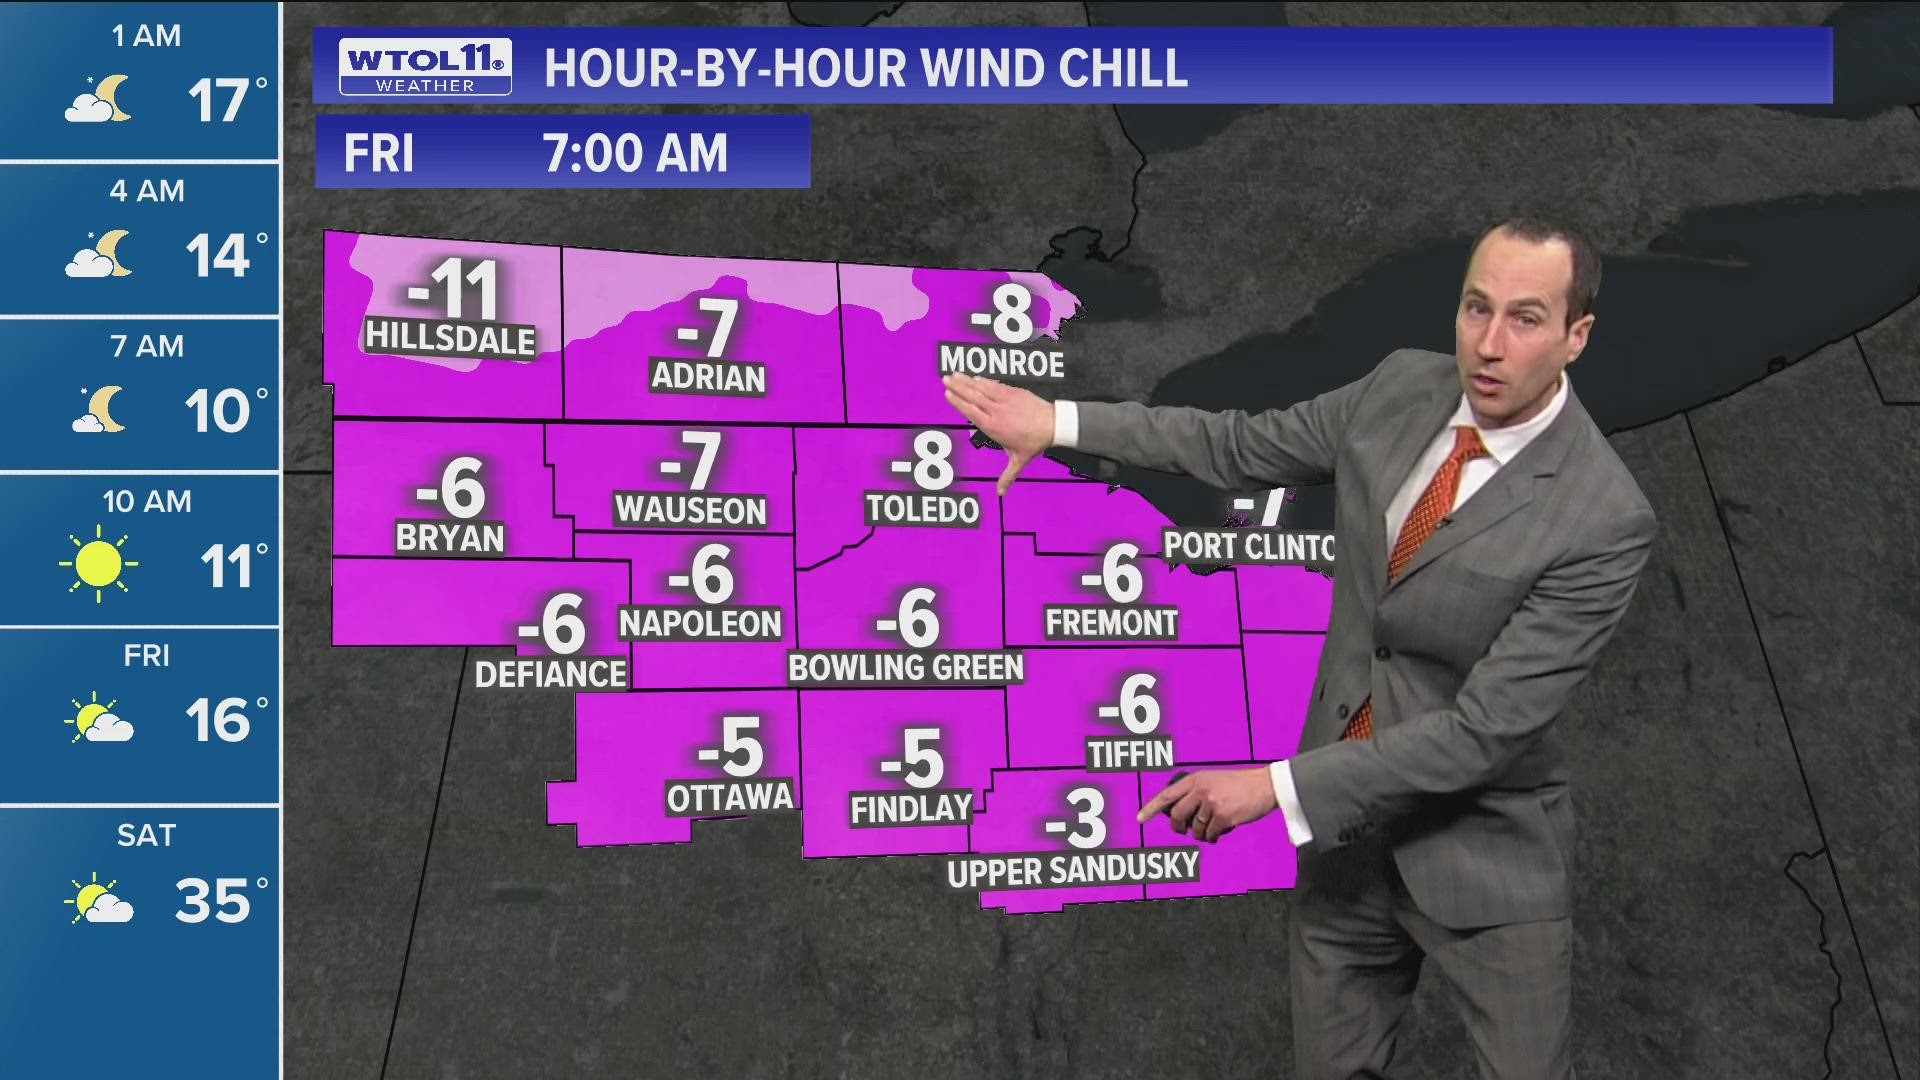 Wind chills will be below zero Friday morning. It will be a brisk, frigid and bitter day Friday with highs in the teens.